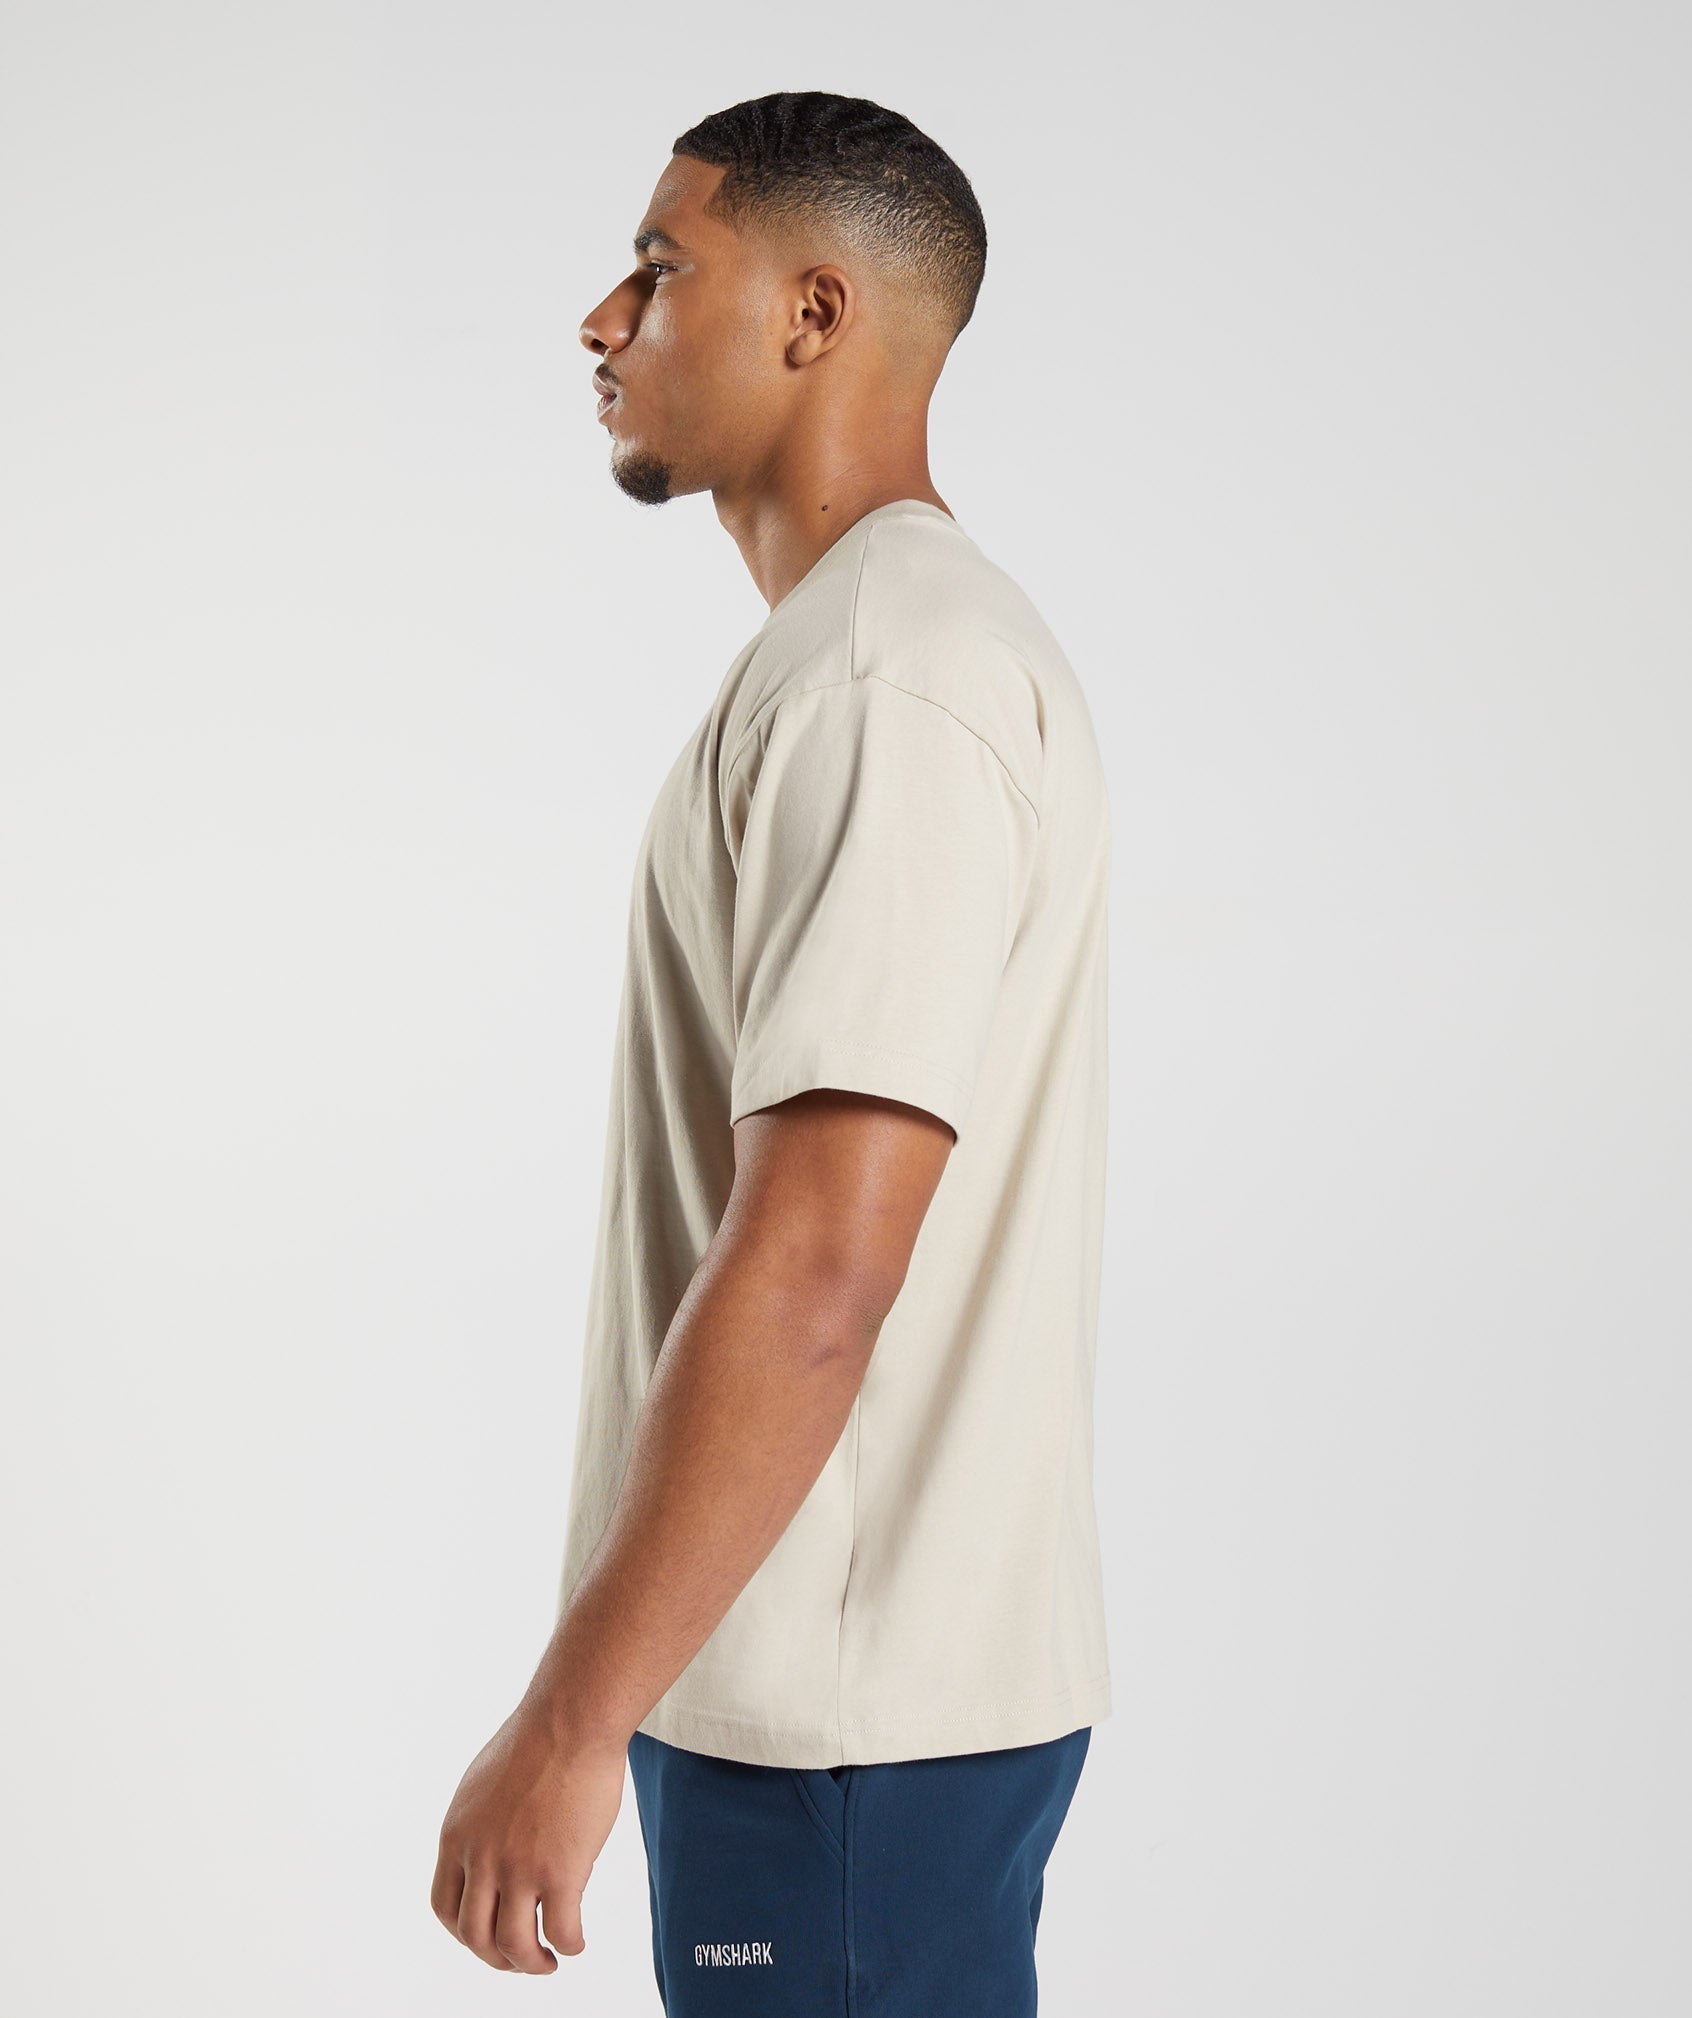 Rest Day Sweats T-Shirt in Pebble Grey - view 4